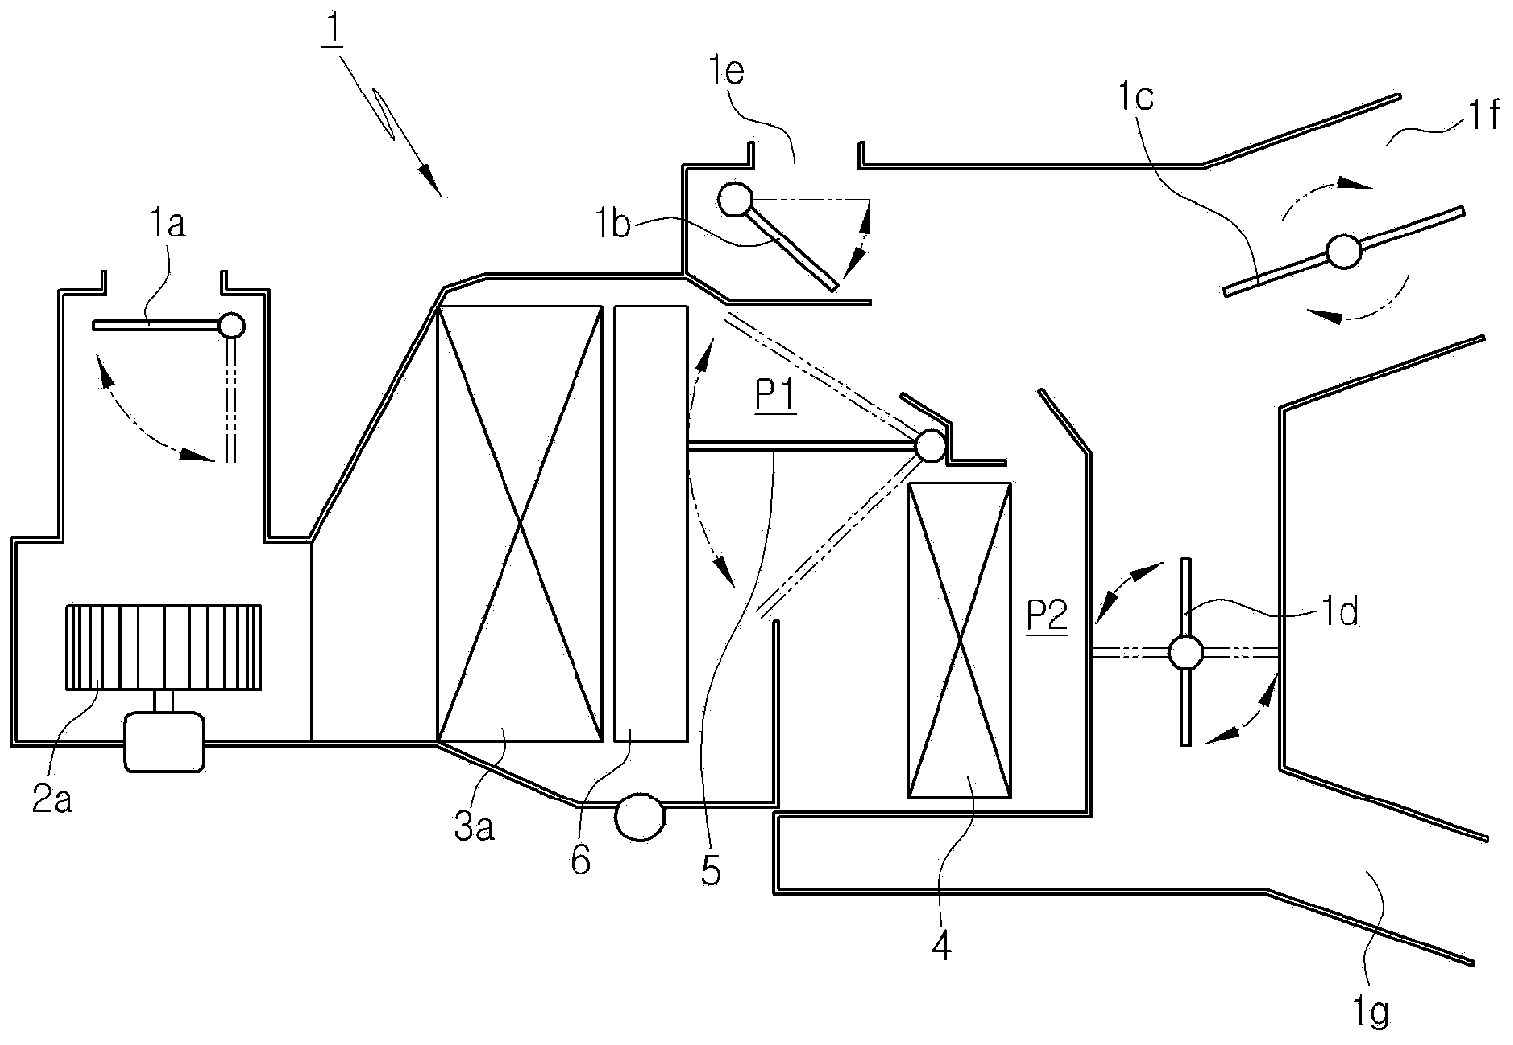 Air conditioning device for vehicle